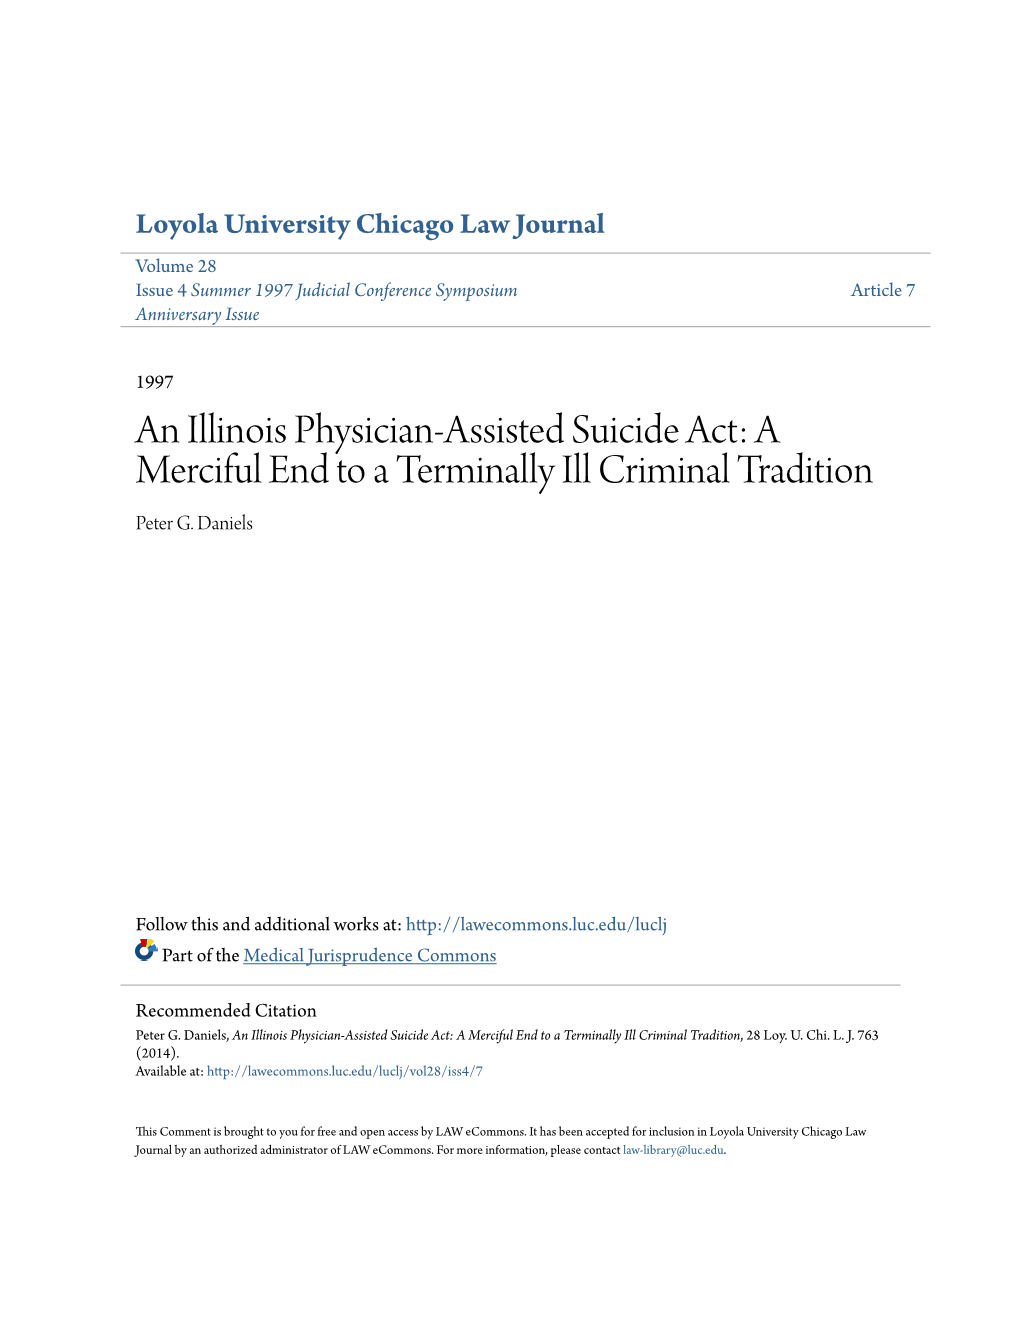 An Illinois Physician-Assisted Suicide Act: a Merciful End to a Terminally Ill Criminal Tradition Peter G